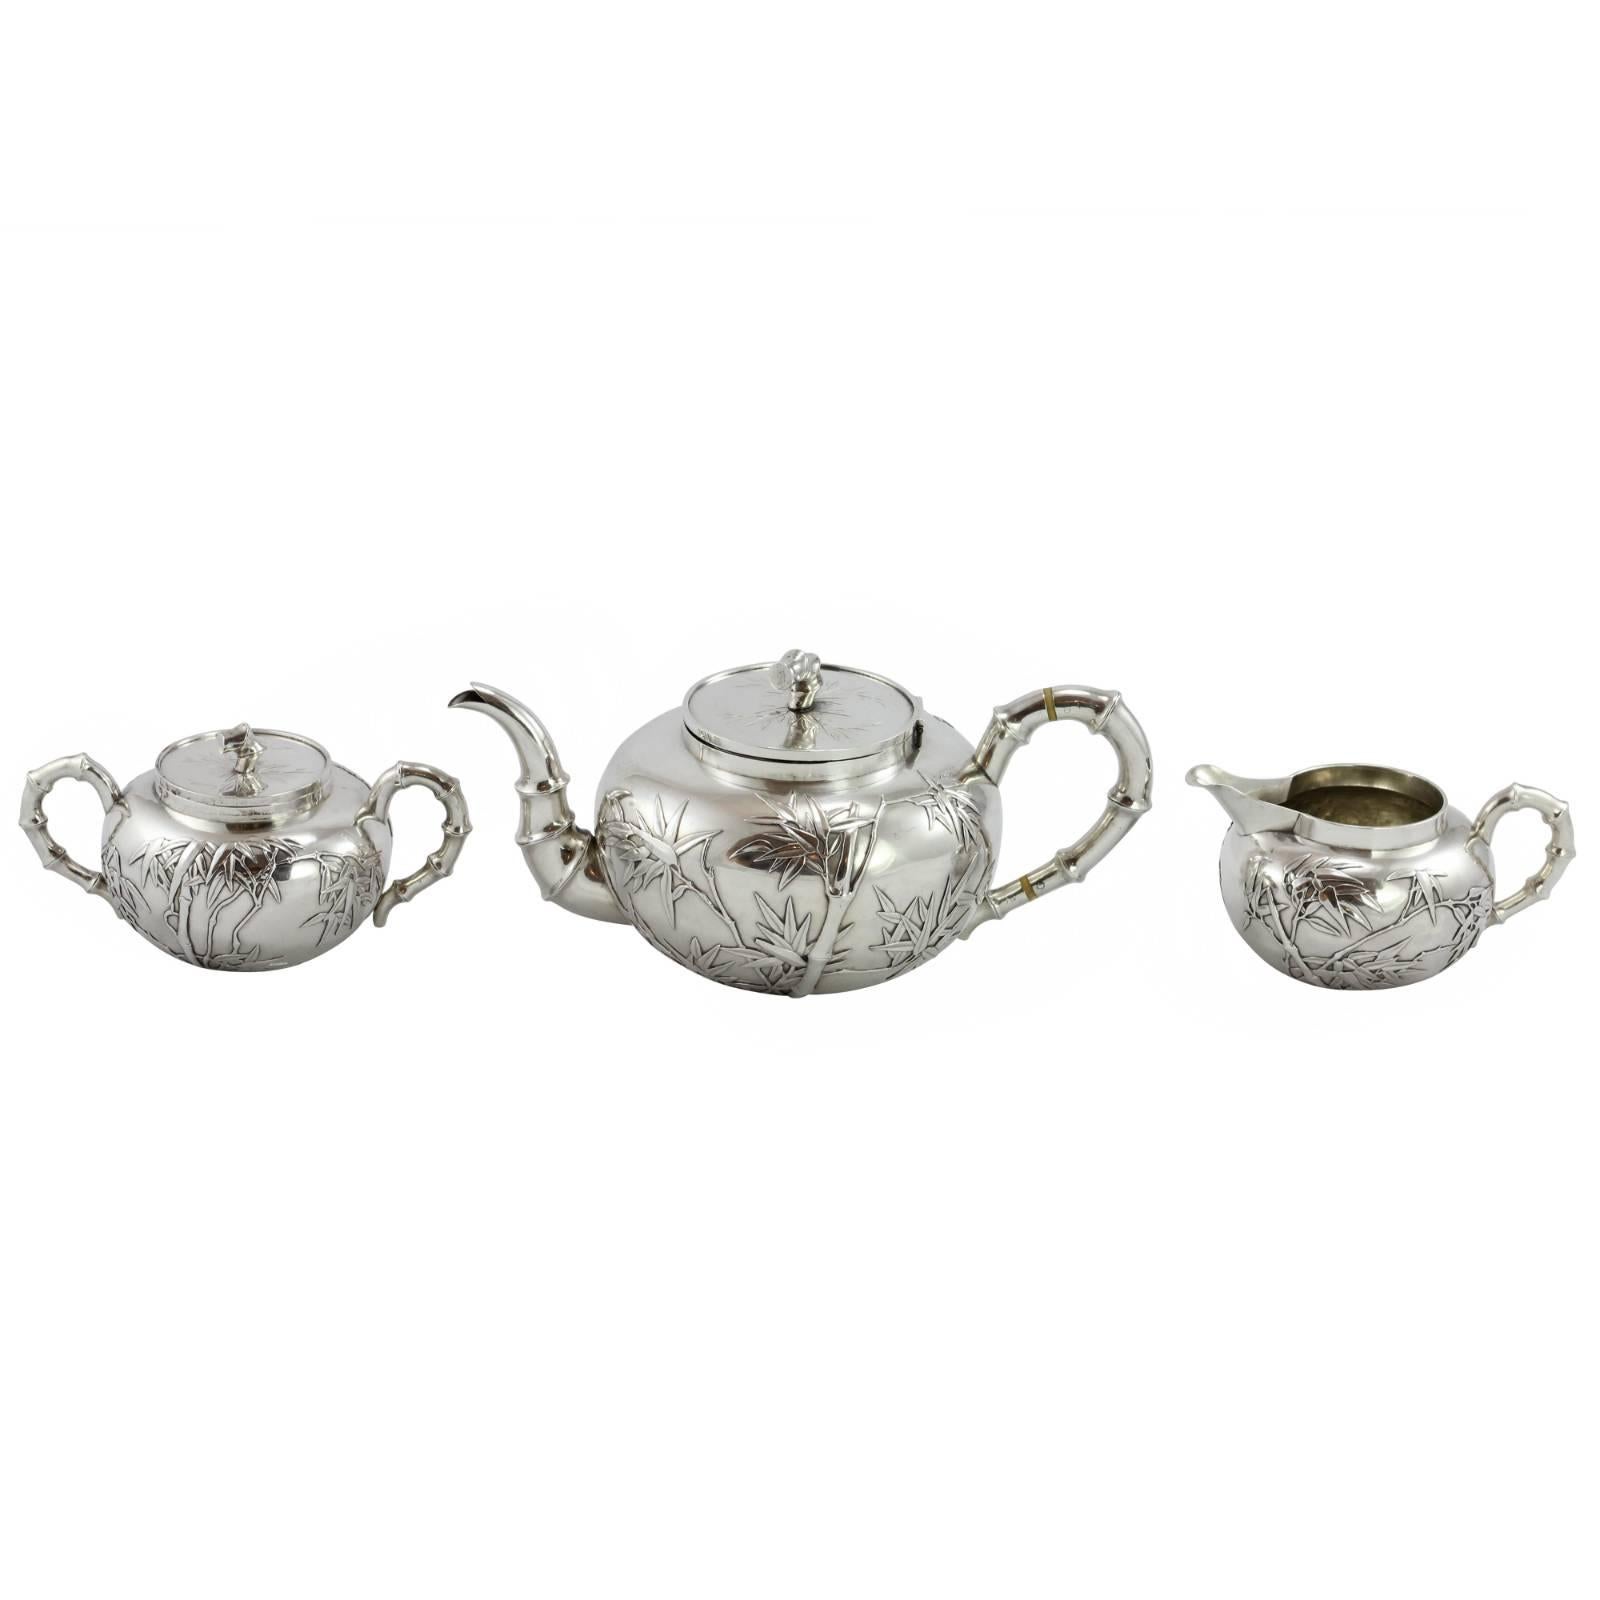 An early 20th century 3 piece Chinese export silver tea set, by Hong Kong based retail silversmith Wang Hing. The piece features a prominent bamboo motif, with the handles, finials, and teapot spout completed as bamboo stalks. The sides of the